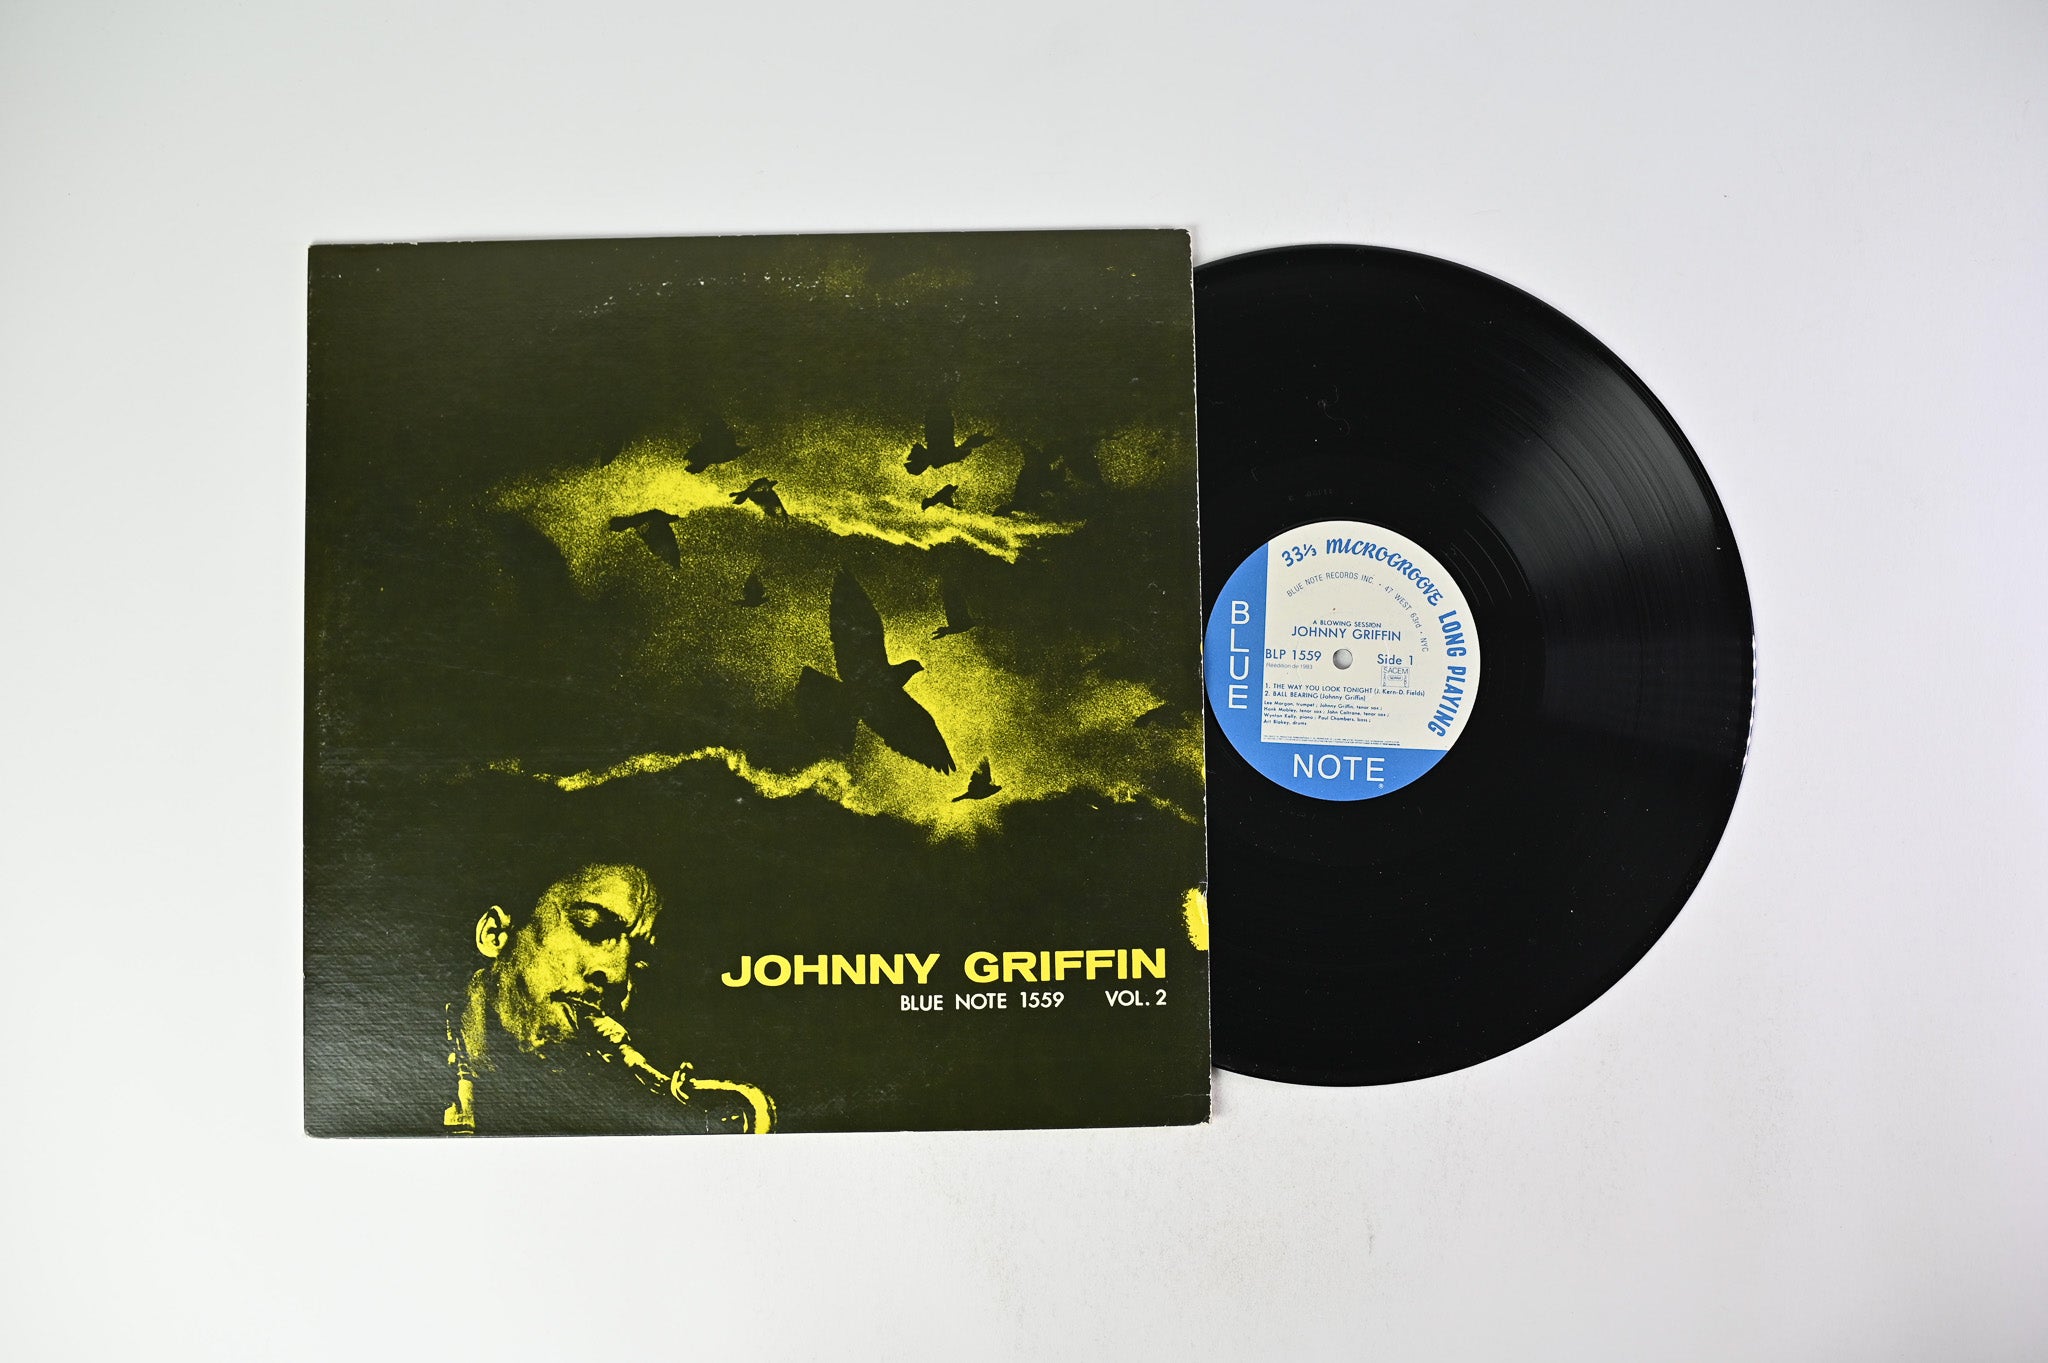 Johnny Griffin - A Blowing Session on Blue Note French Reissue